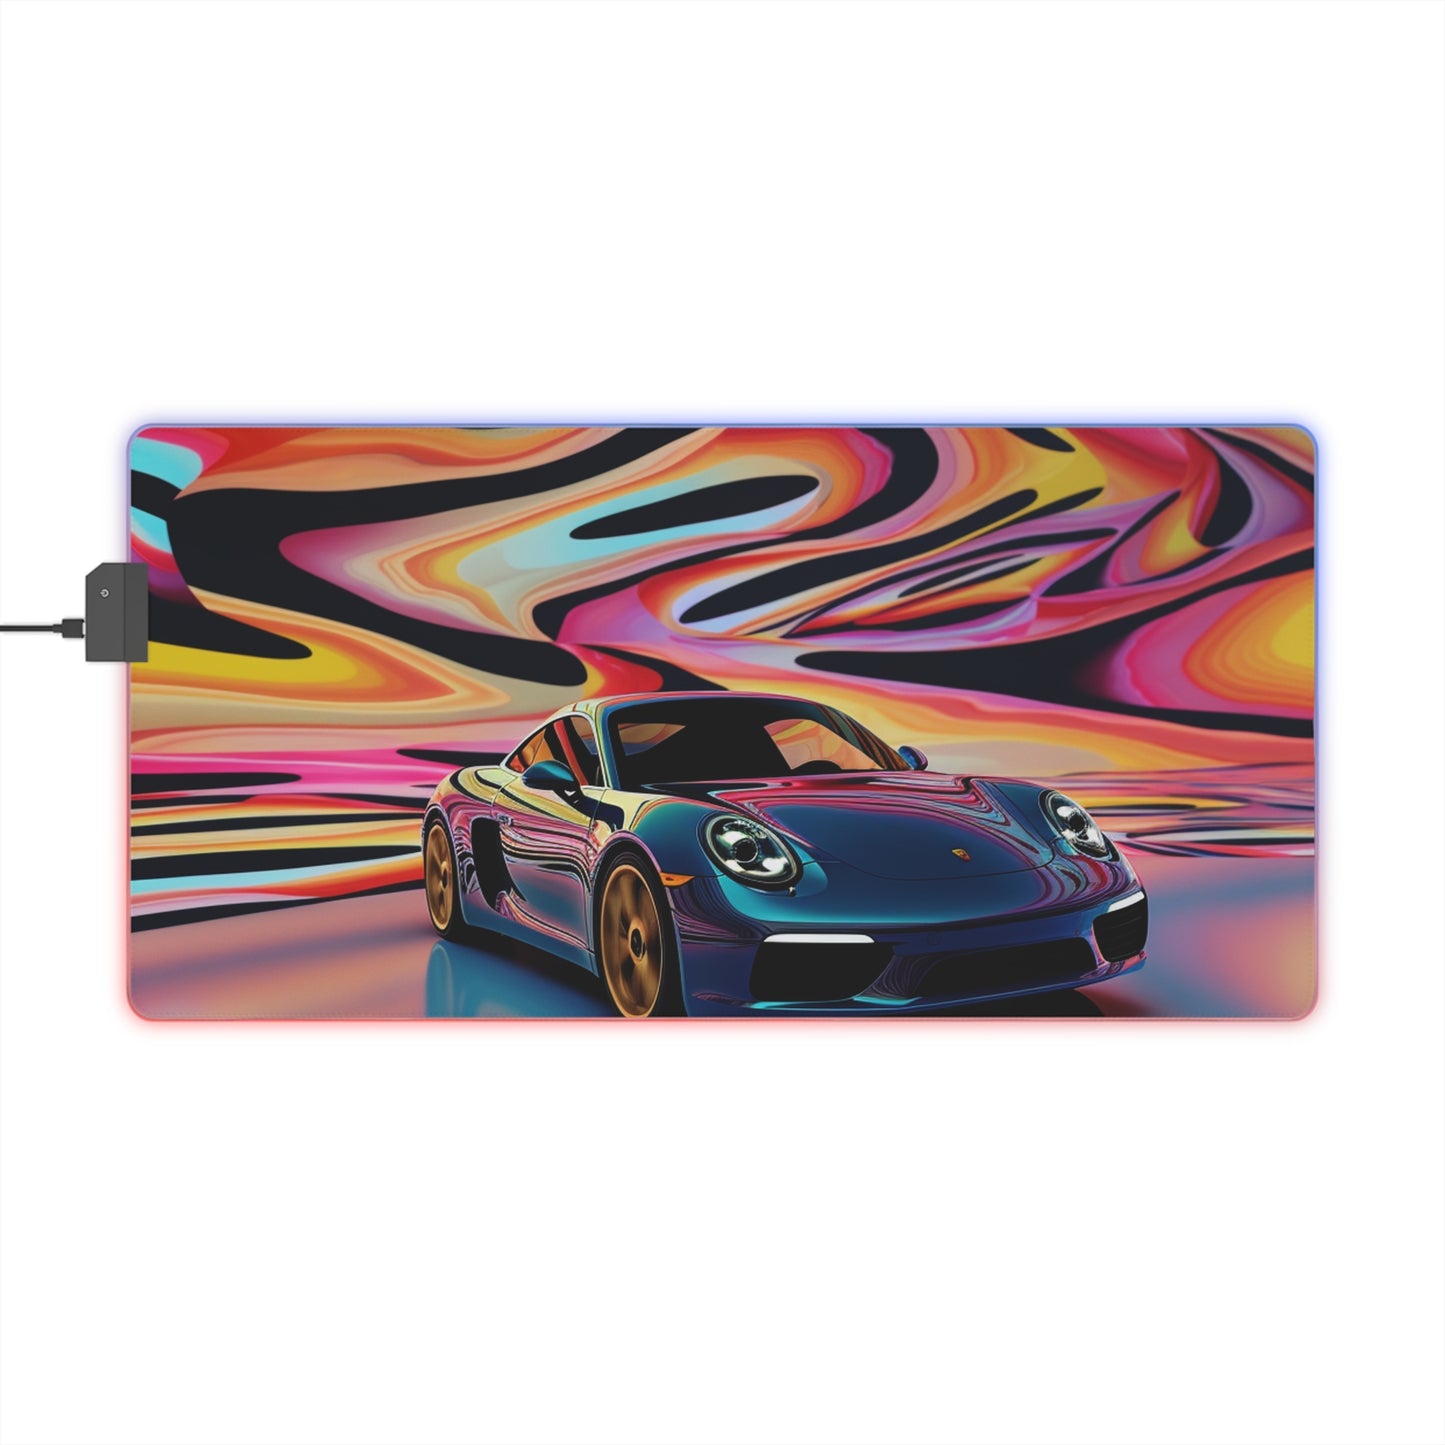 LED Gaming Mouse Pad Porsche Water Fusion 2